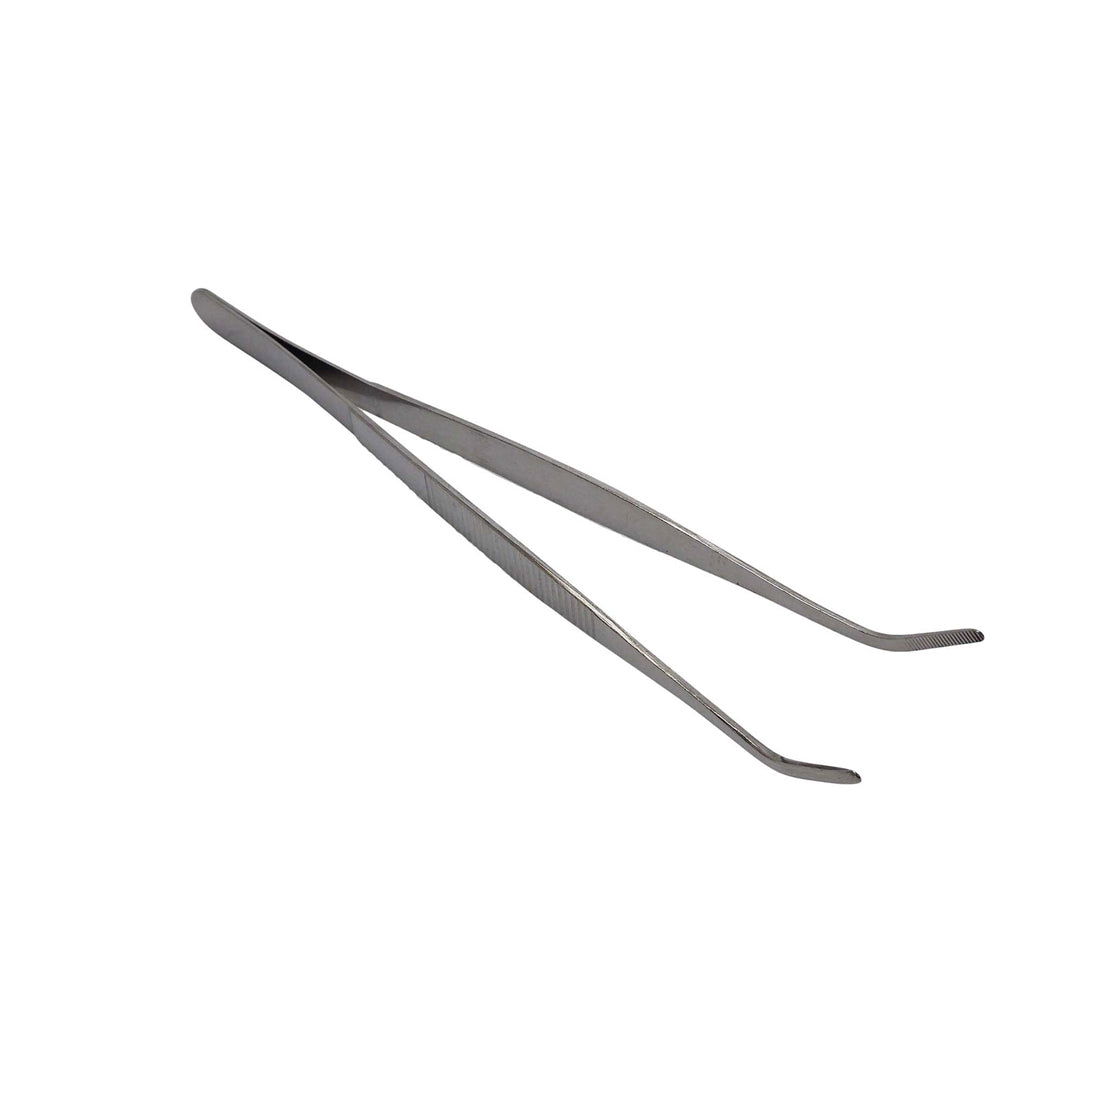 Livefood Stainless Steel Tweezers Curved End 250mm (10") Bulk Buy x24